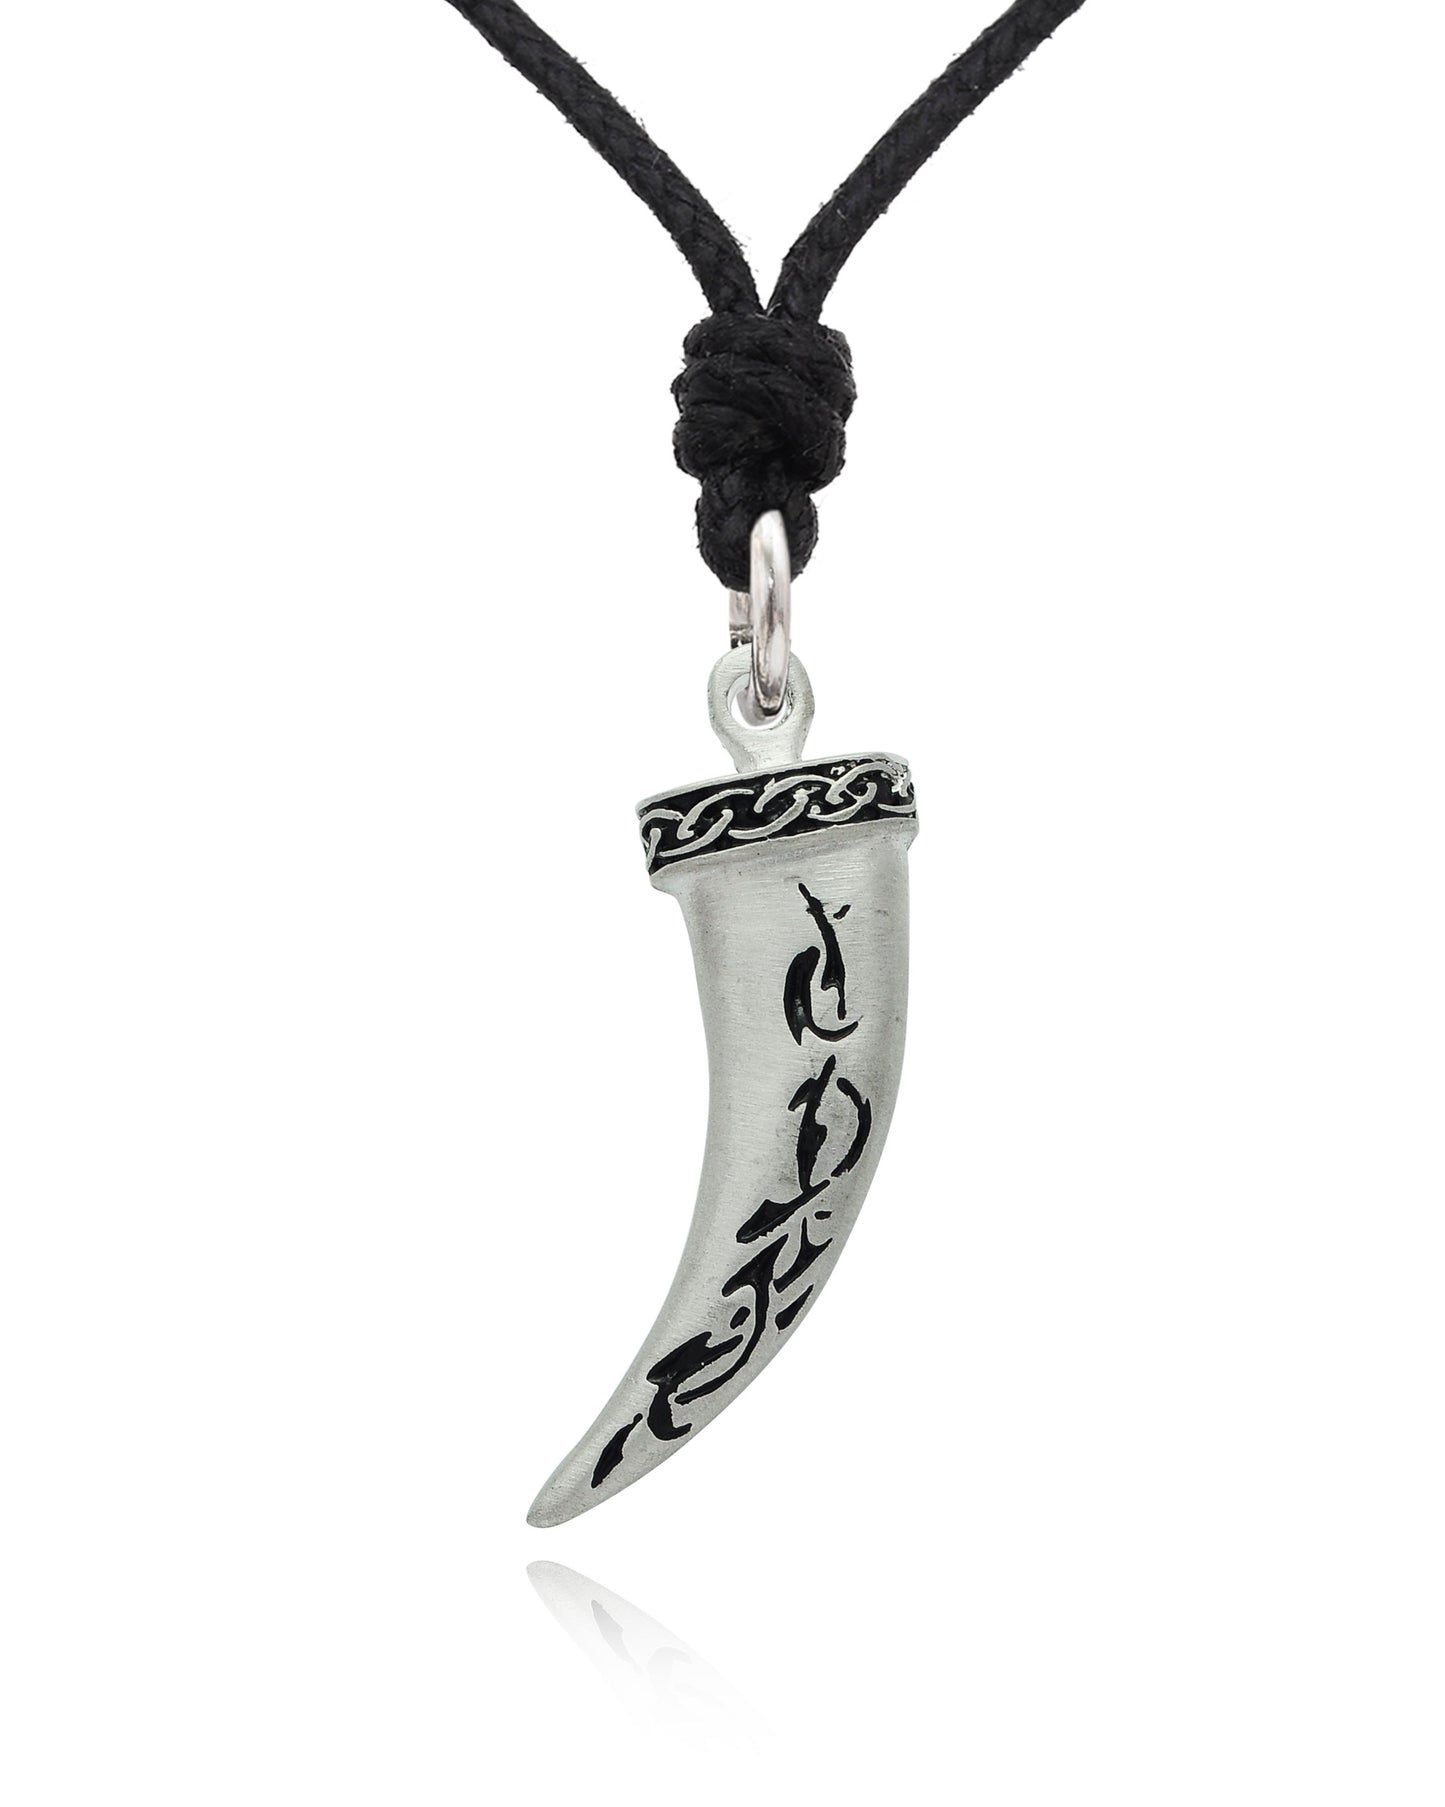 Fang Silver Pewter Necklace Pendant Jewelry